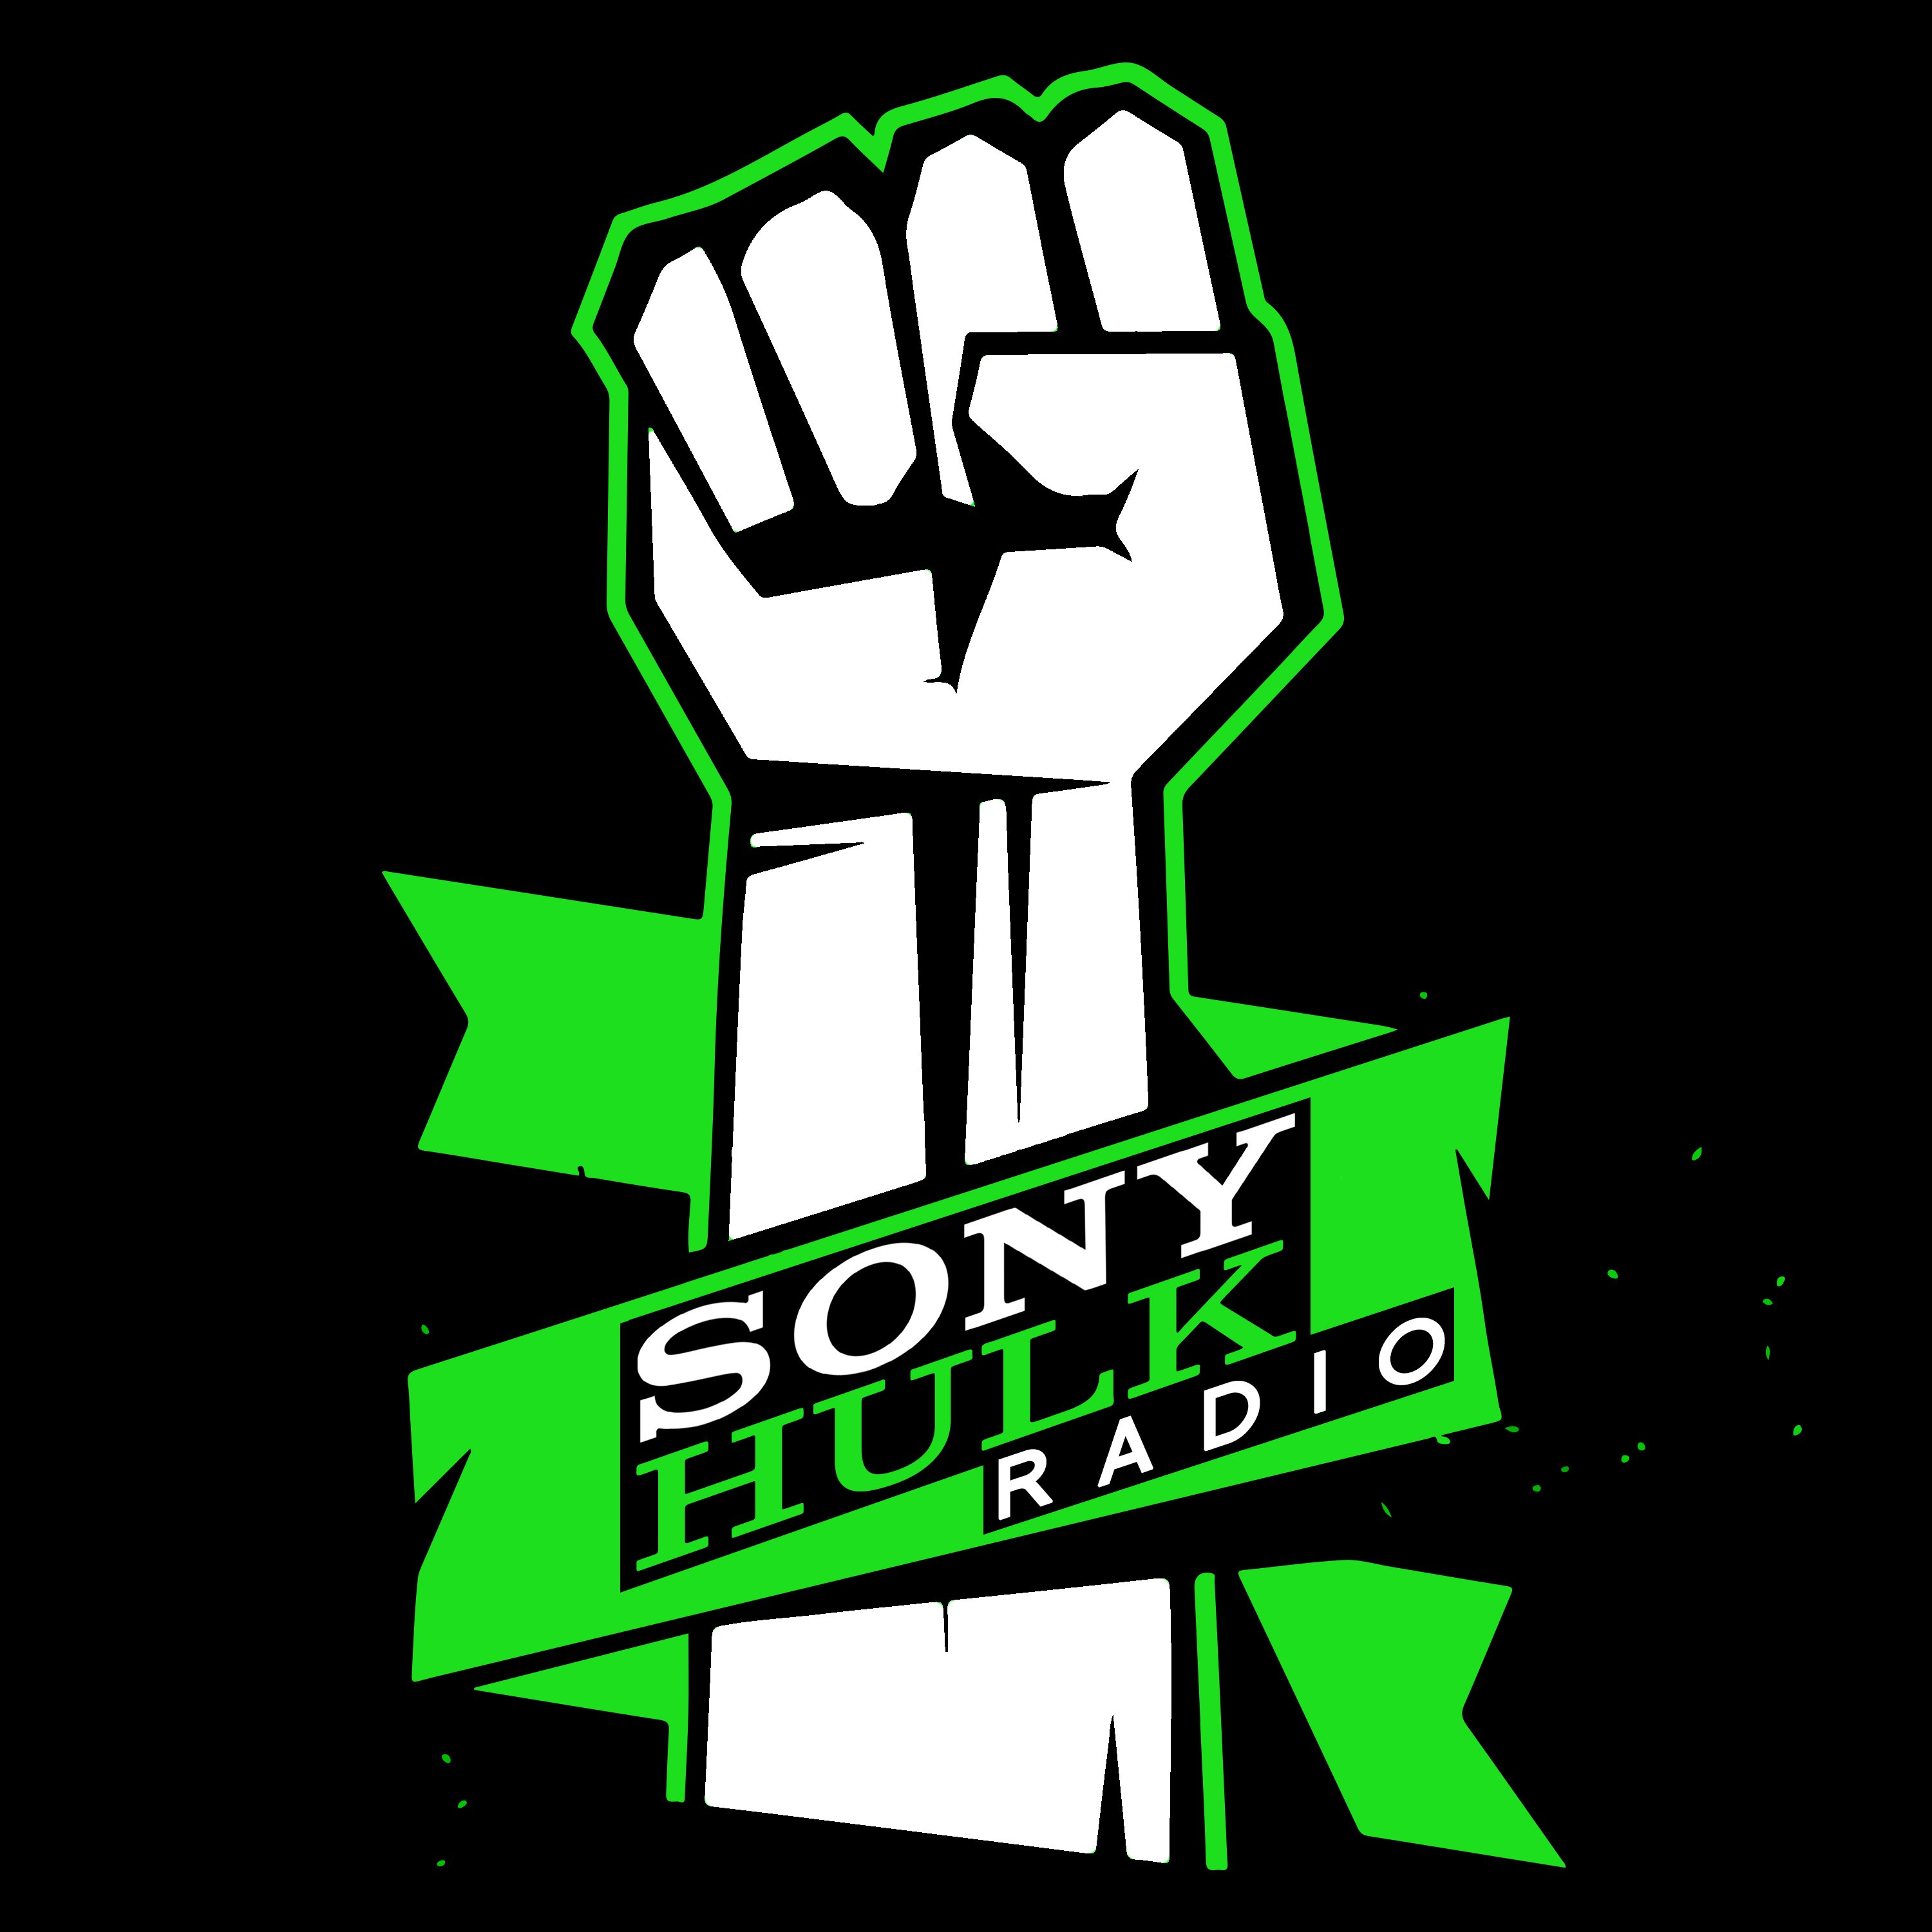 Sony Hulk Radio is your top choice for discovering new hits or tuning into the most fascinating radio shows. With our music curators working around the clock to